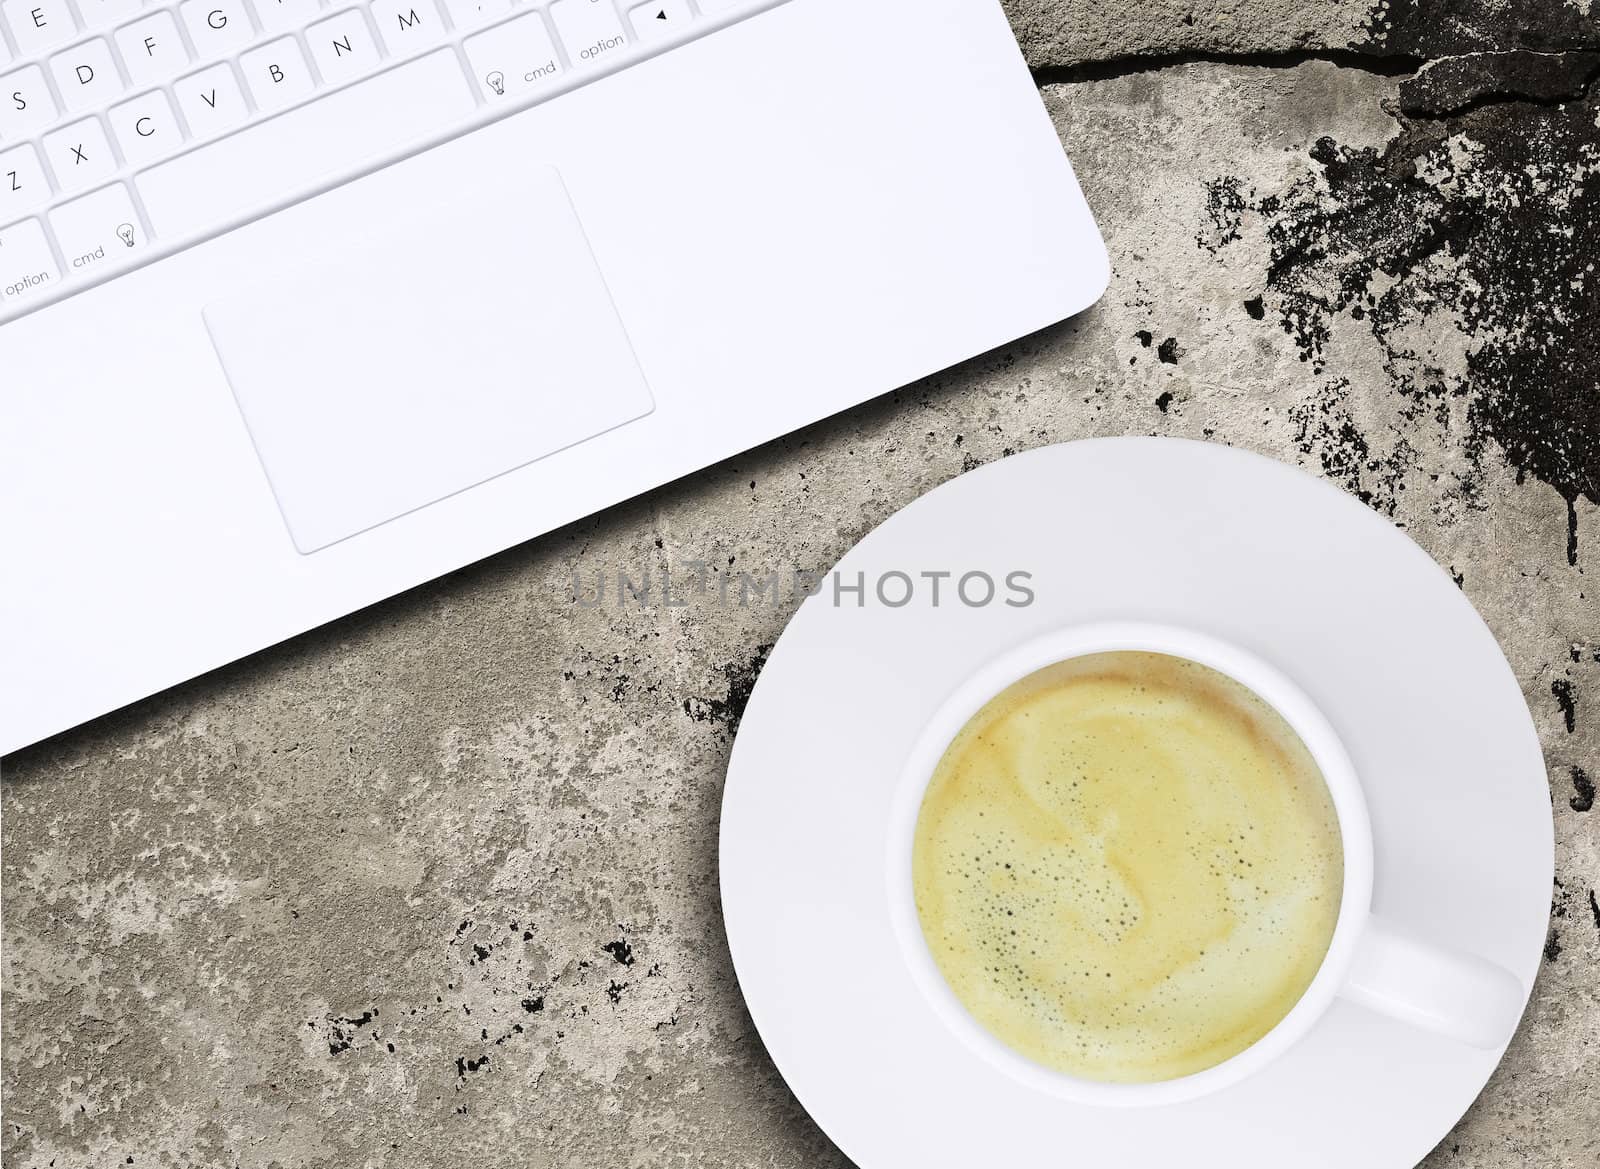 Laptop and coffee cup on old concrete surface. Computer technology concept